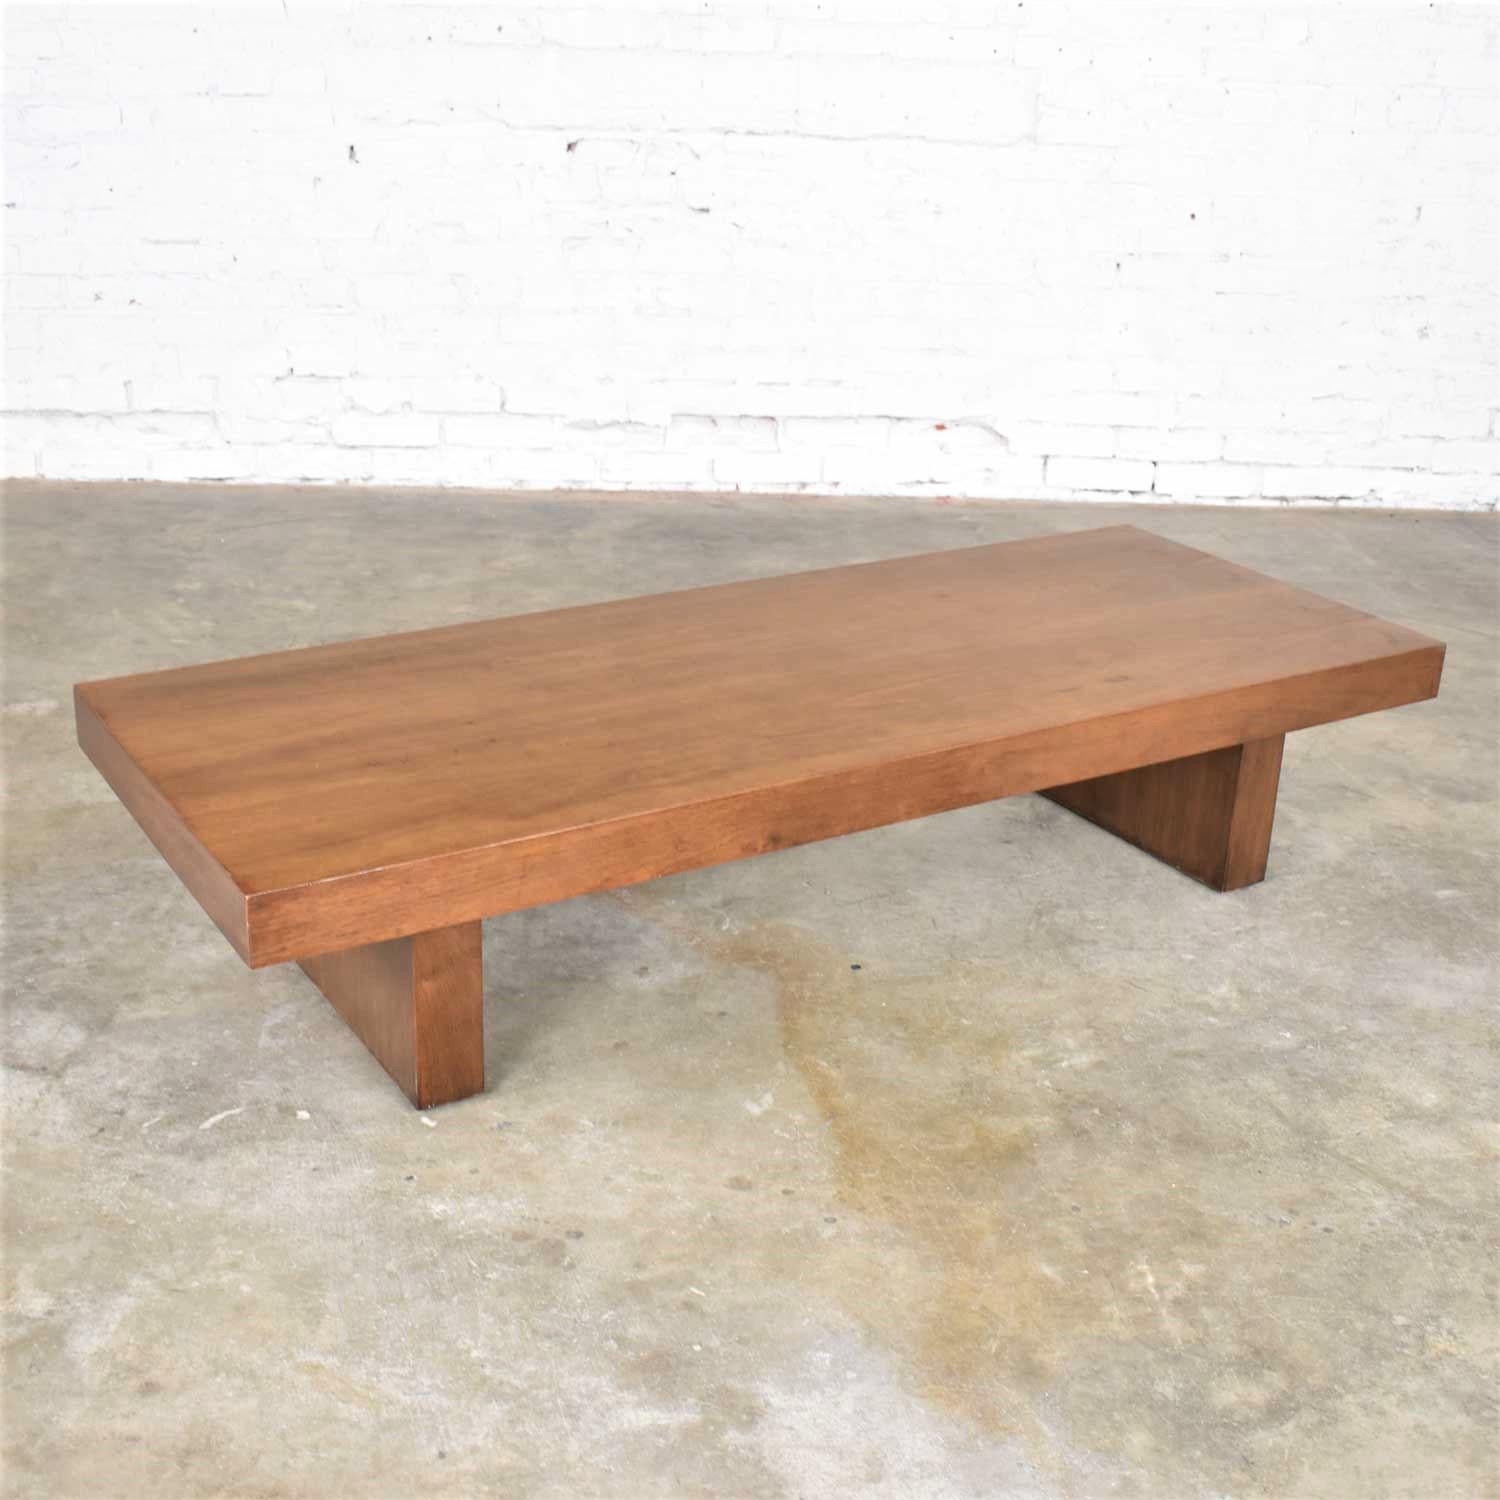 Veneer Show-Pieces Mid-Century Modern Asian Low Coffee Teahouse Table Bench in Walnut